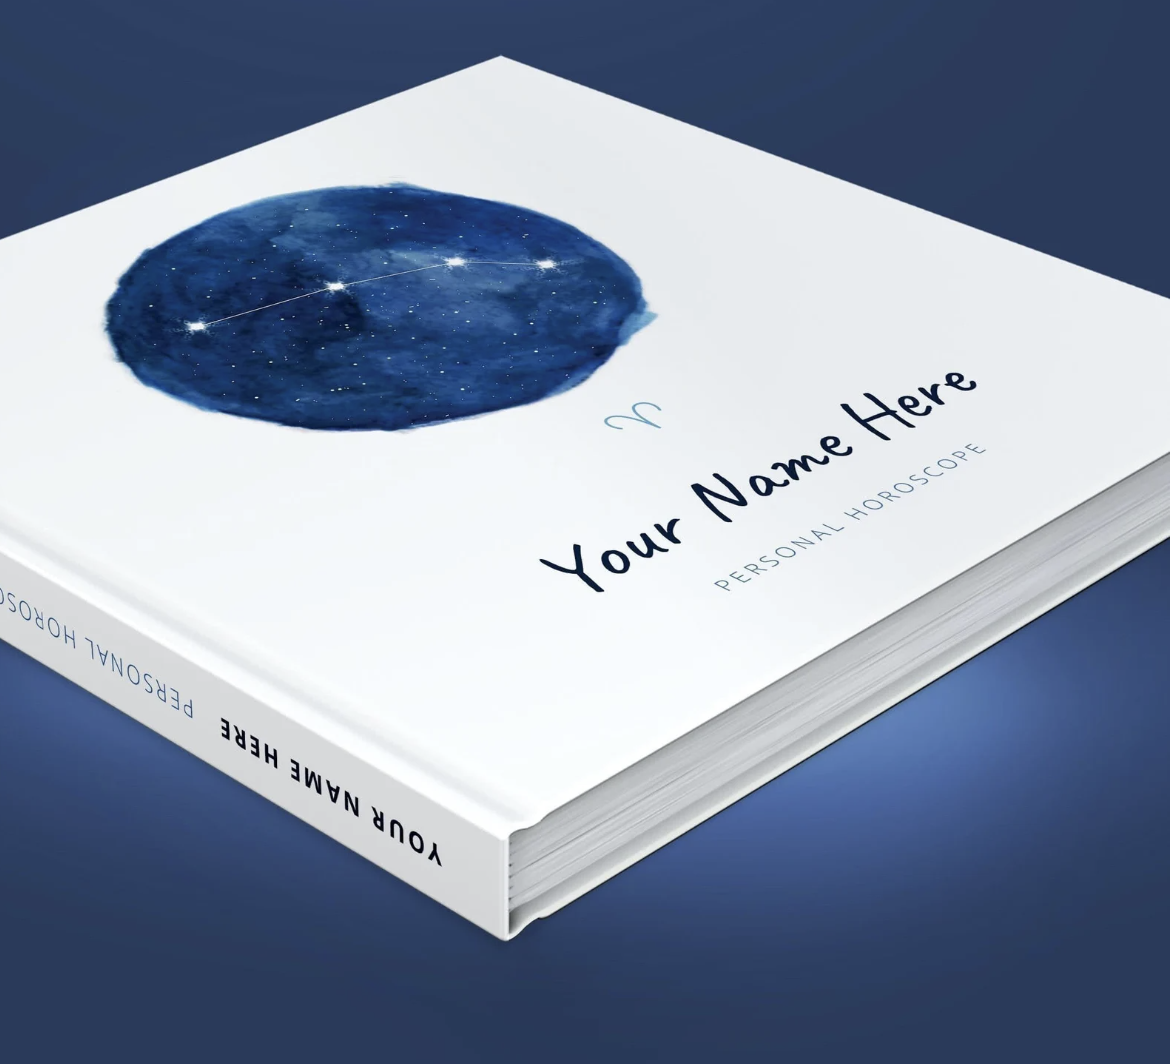 A white hardcover book with a blue circle and constellation that says "Your Name Here" resting on a blue background